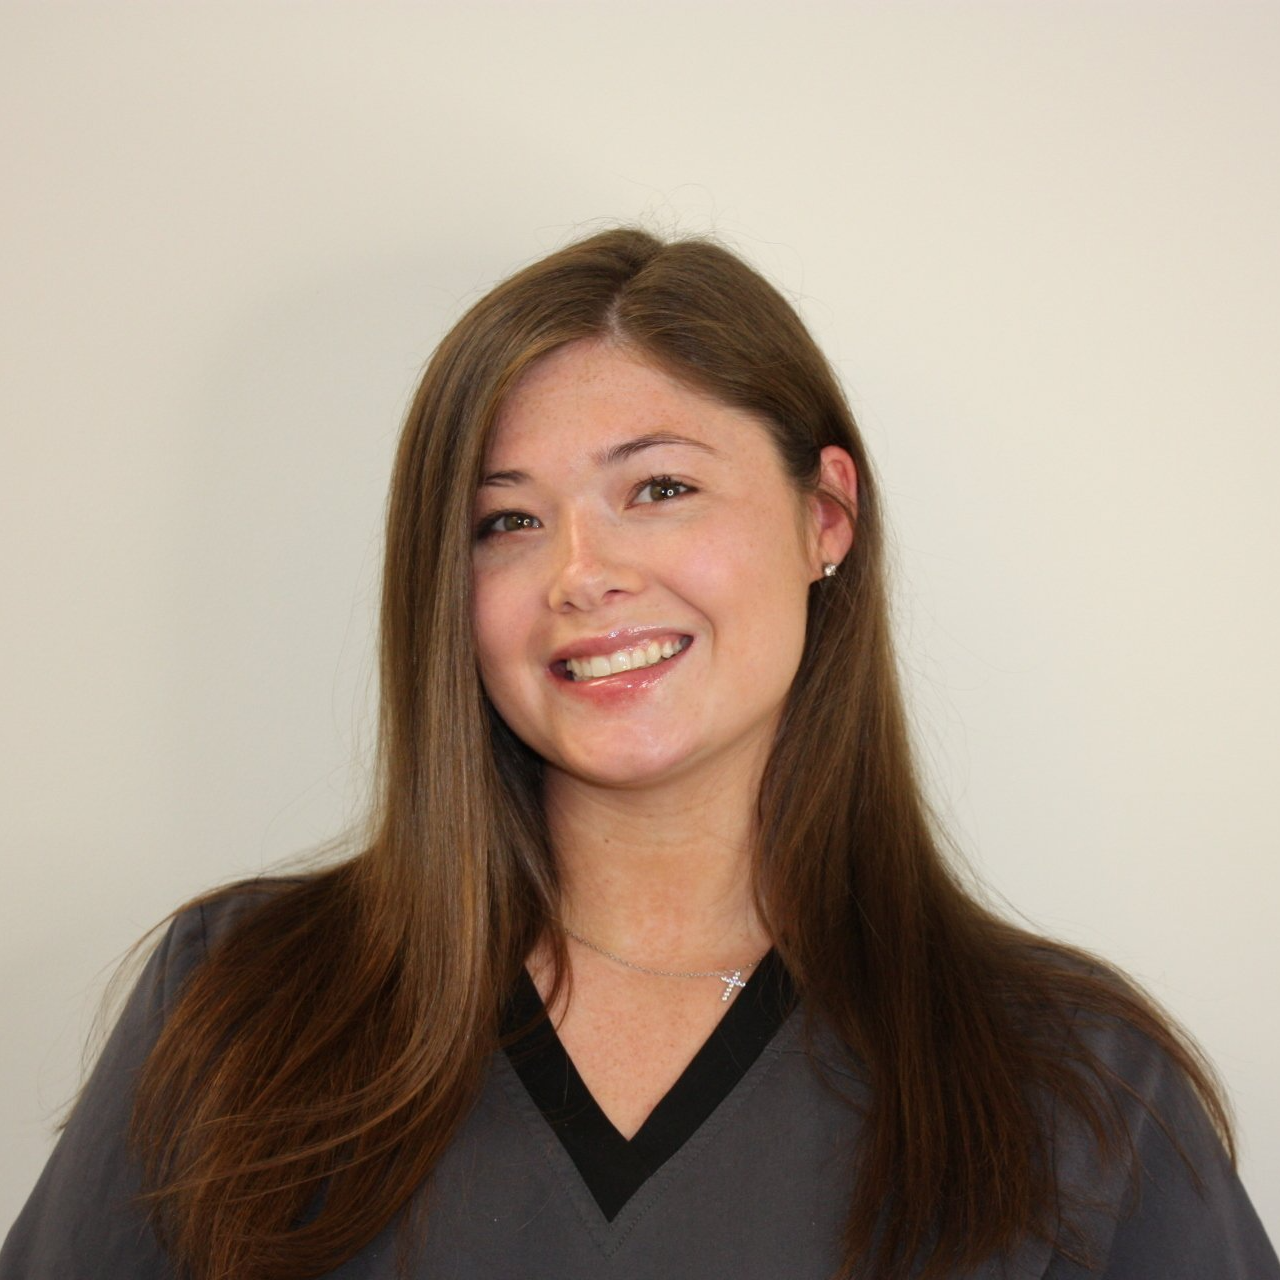 Danielle Dental Assistant at Sewell Dental